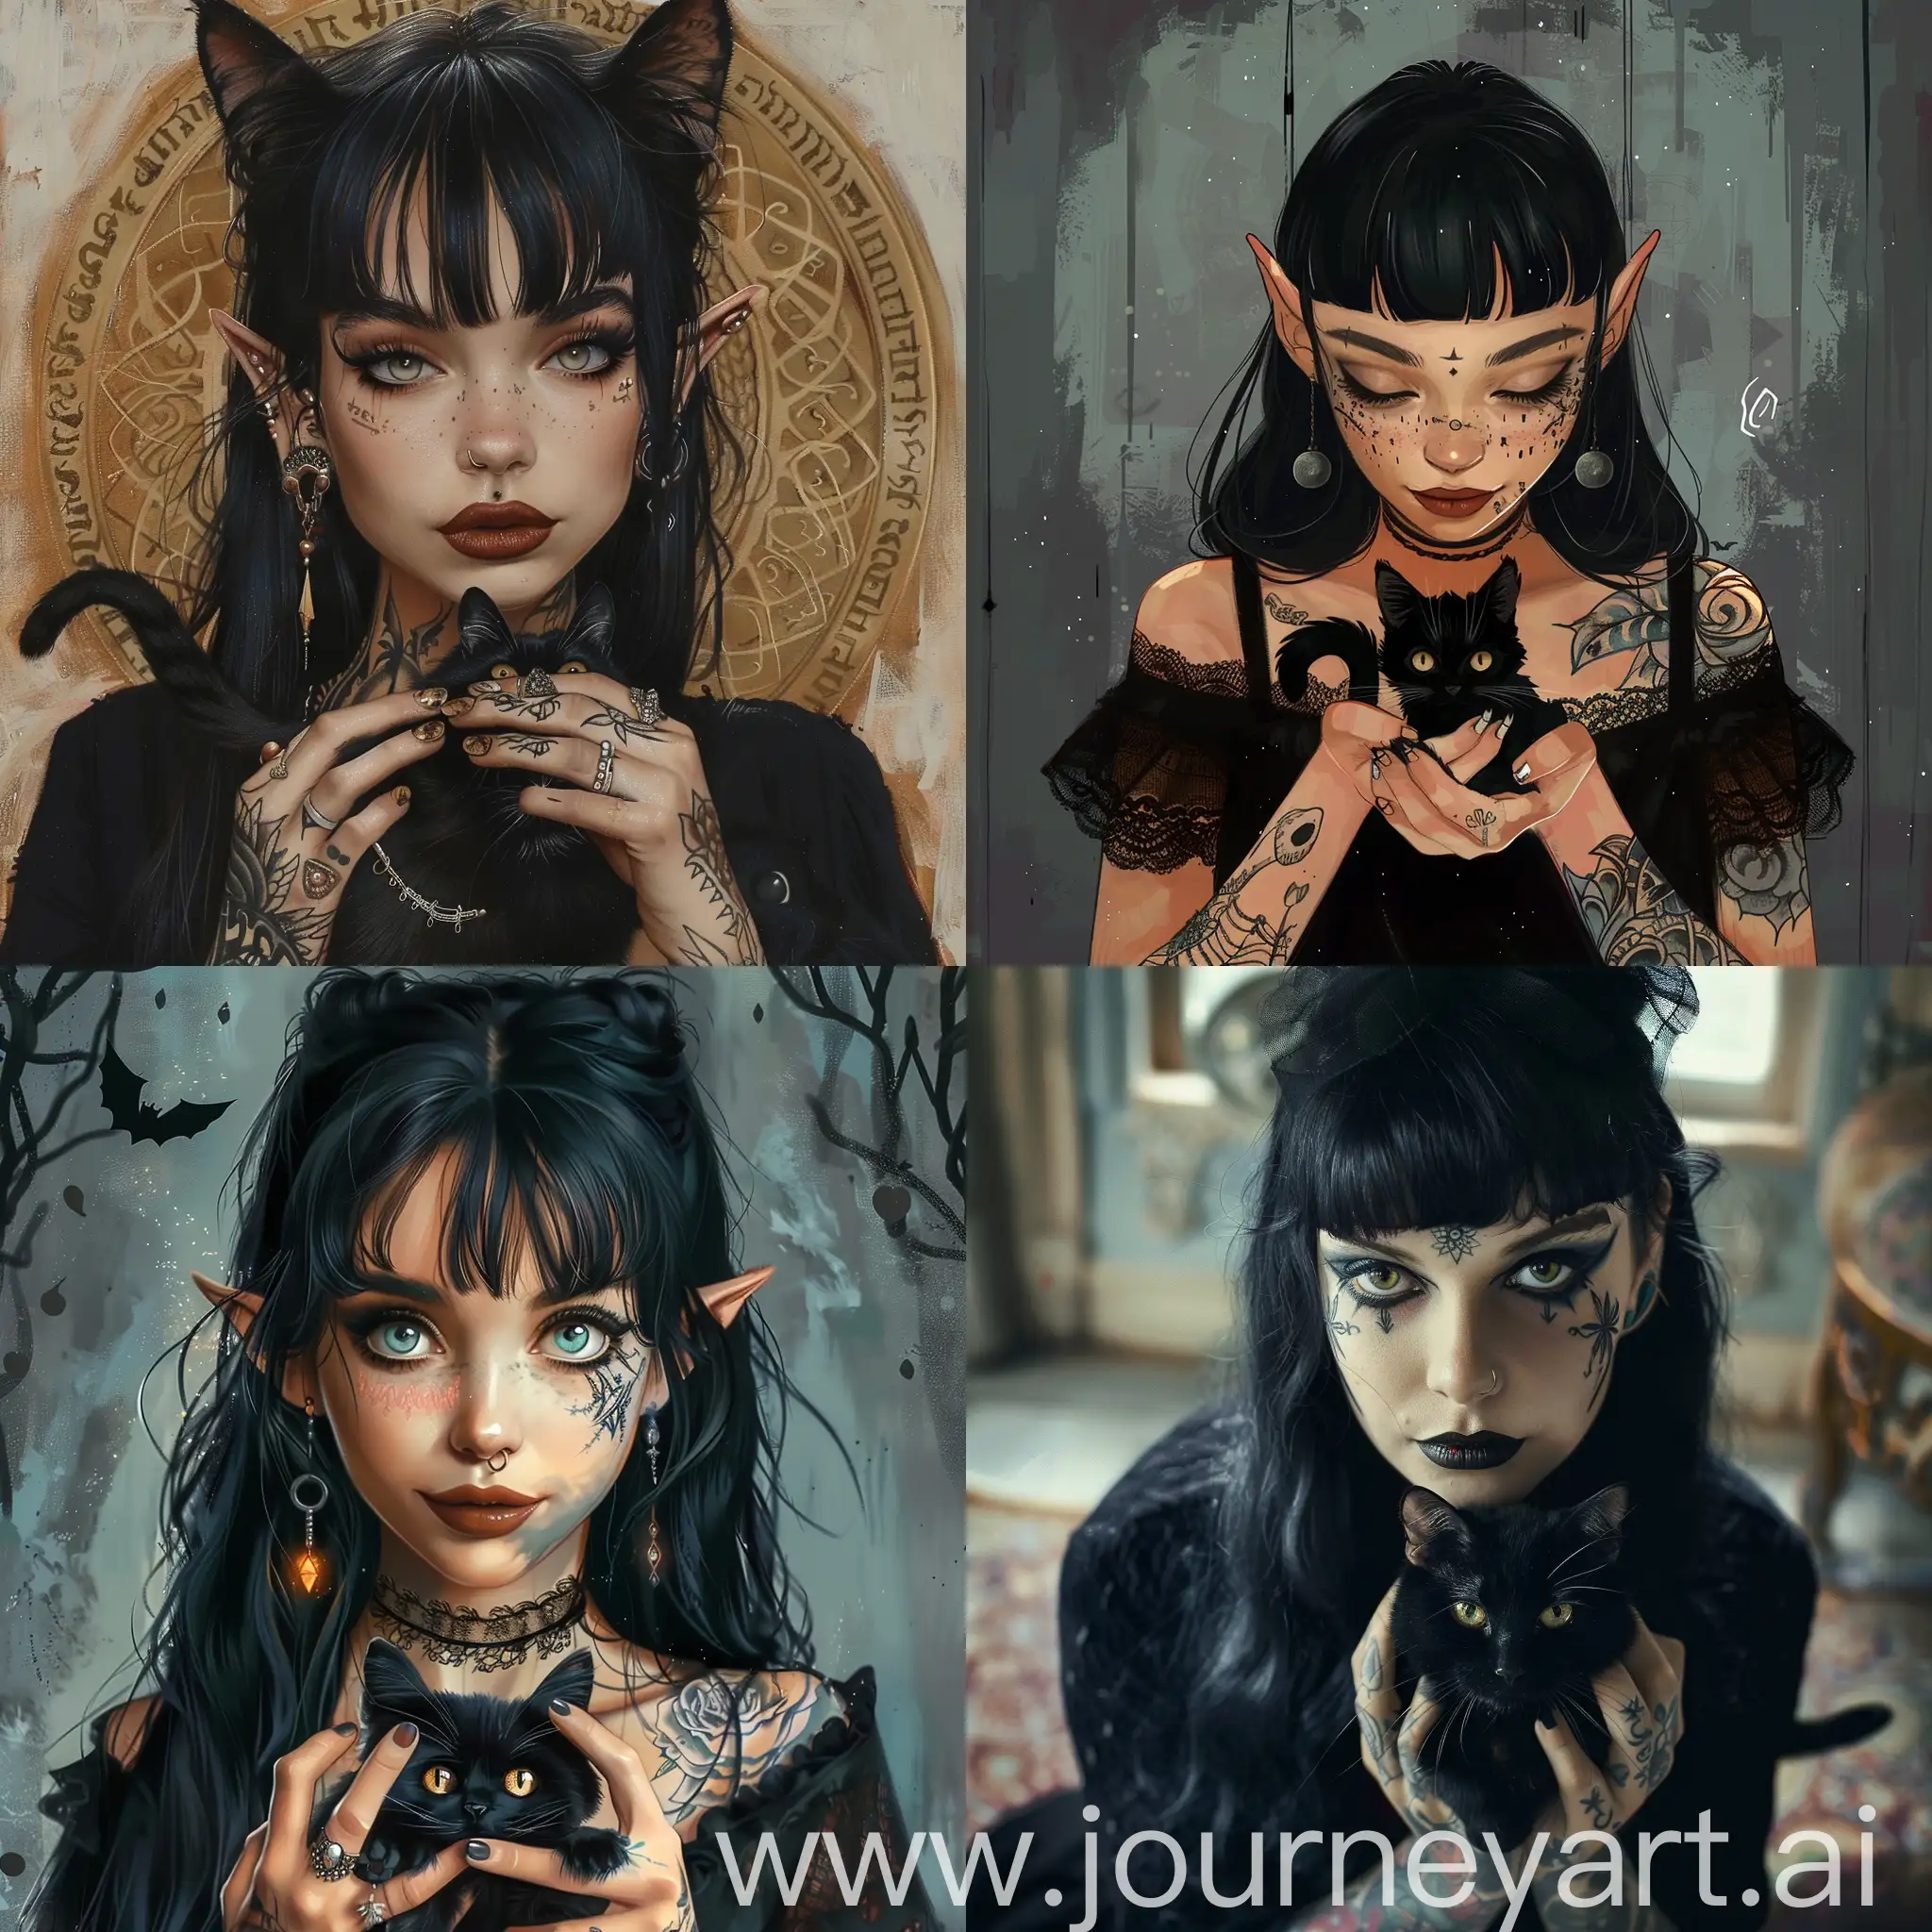 Mysterious-Witch-Girl-Holding-Black-Cat-with-Tattoo